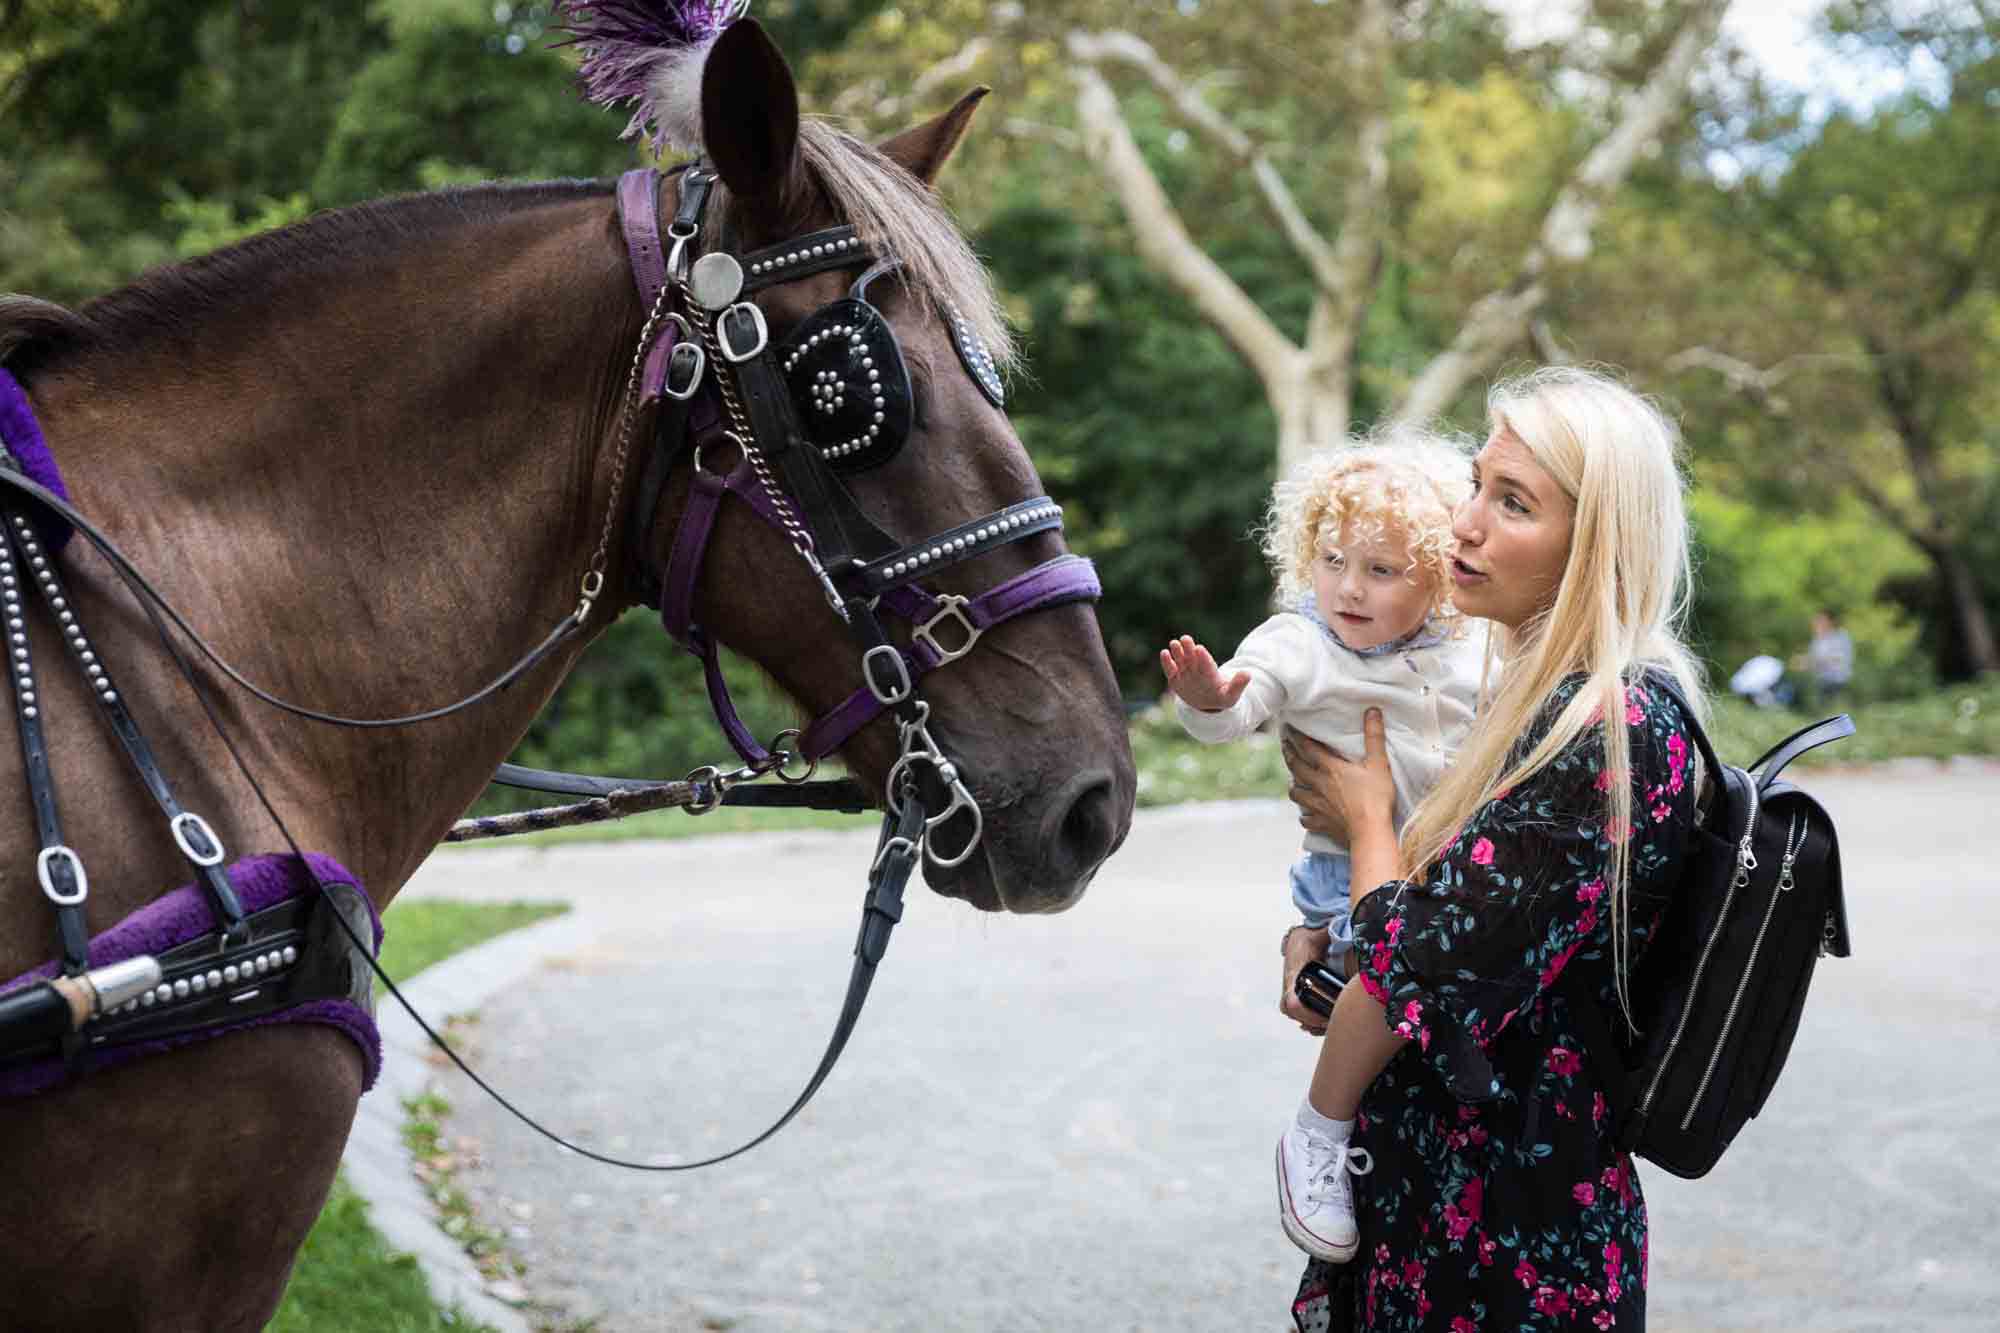 Central Park family portrait of mother and child petting horse